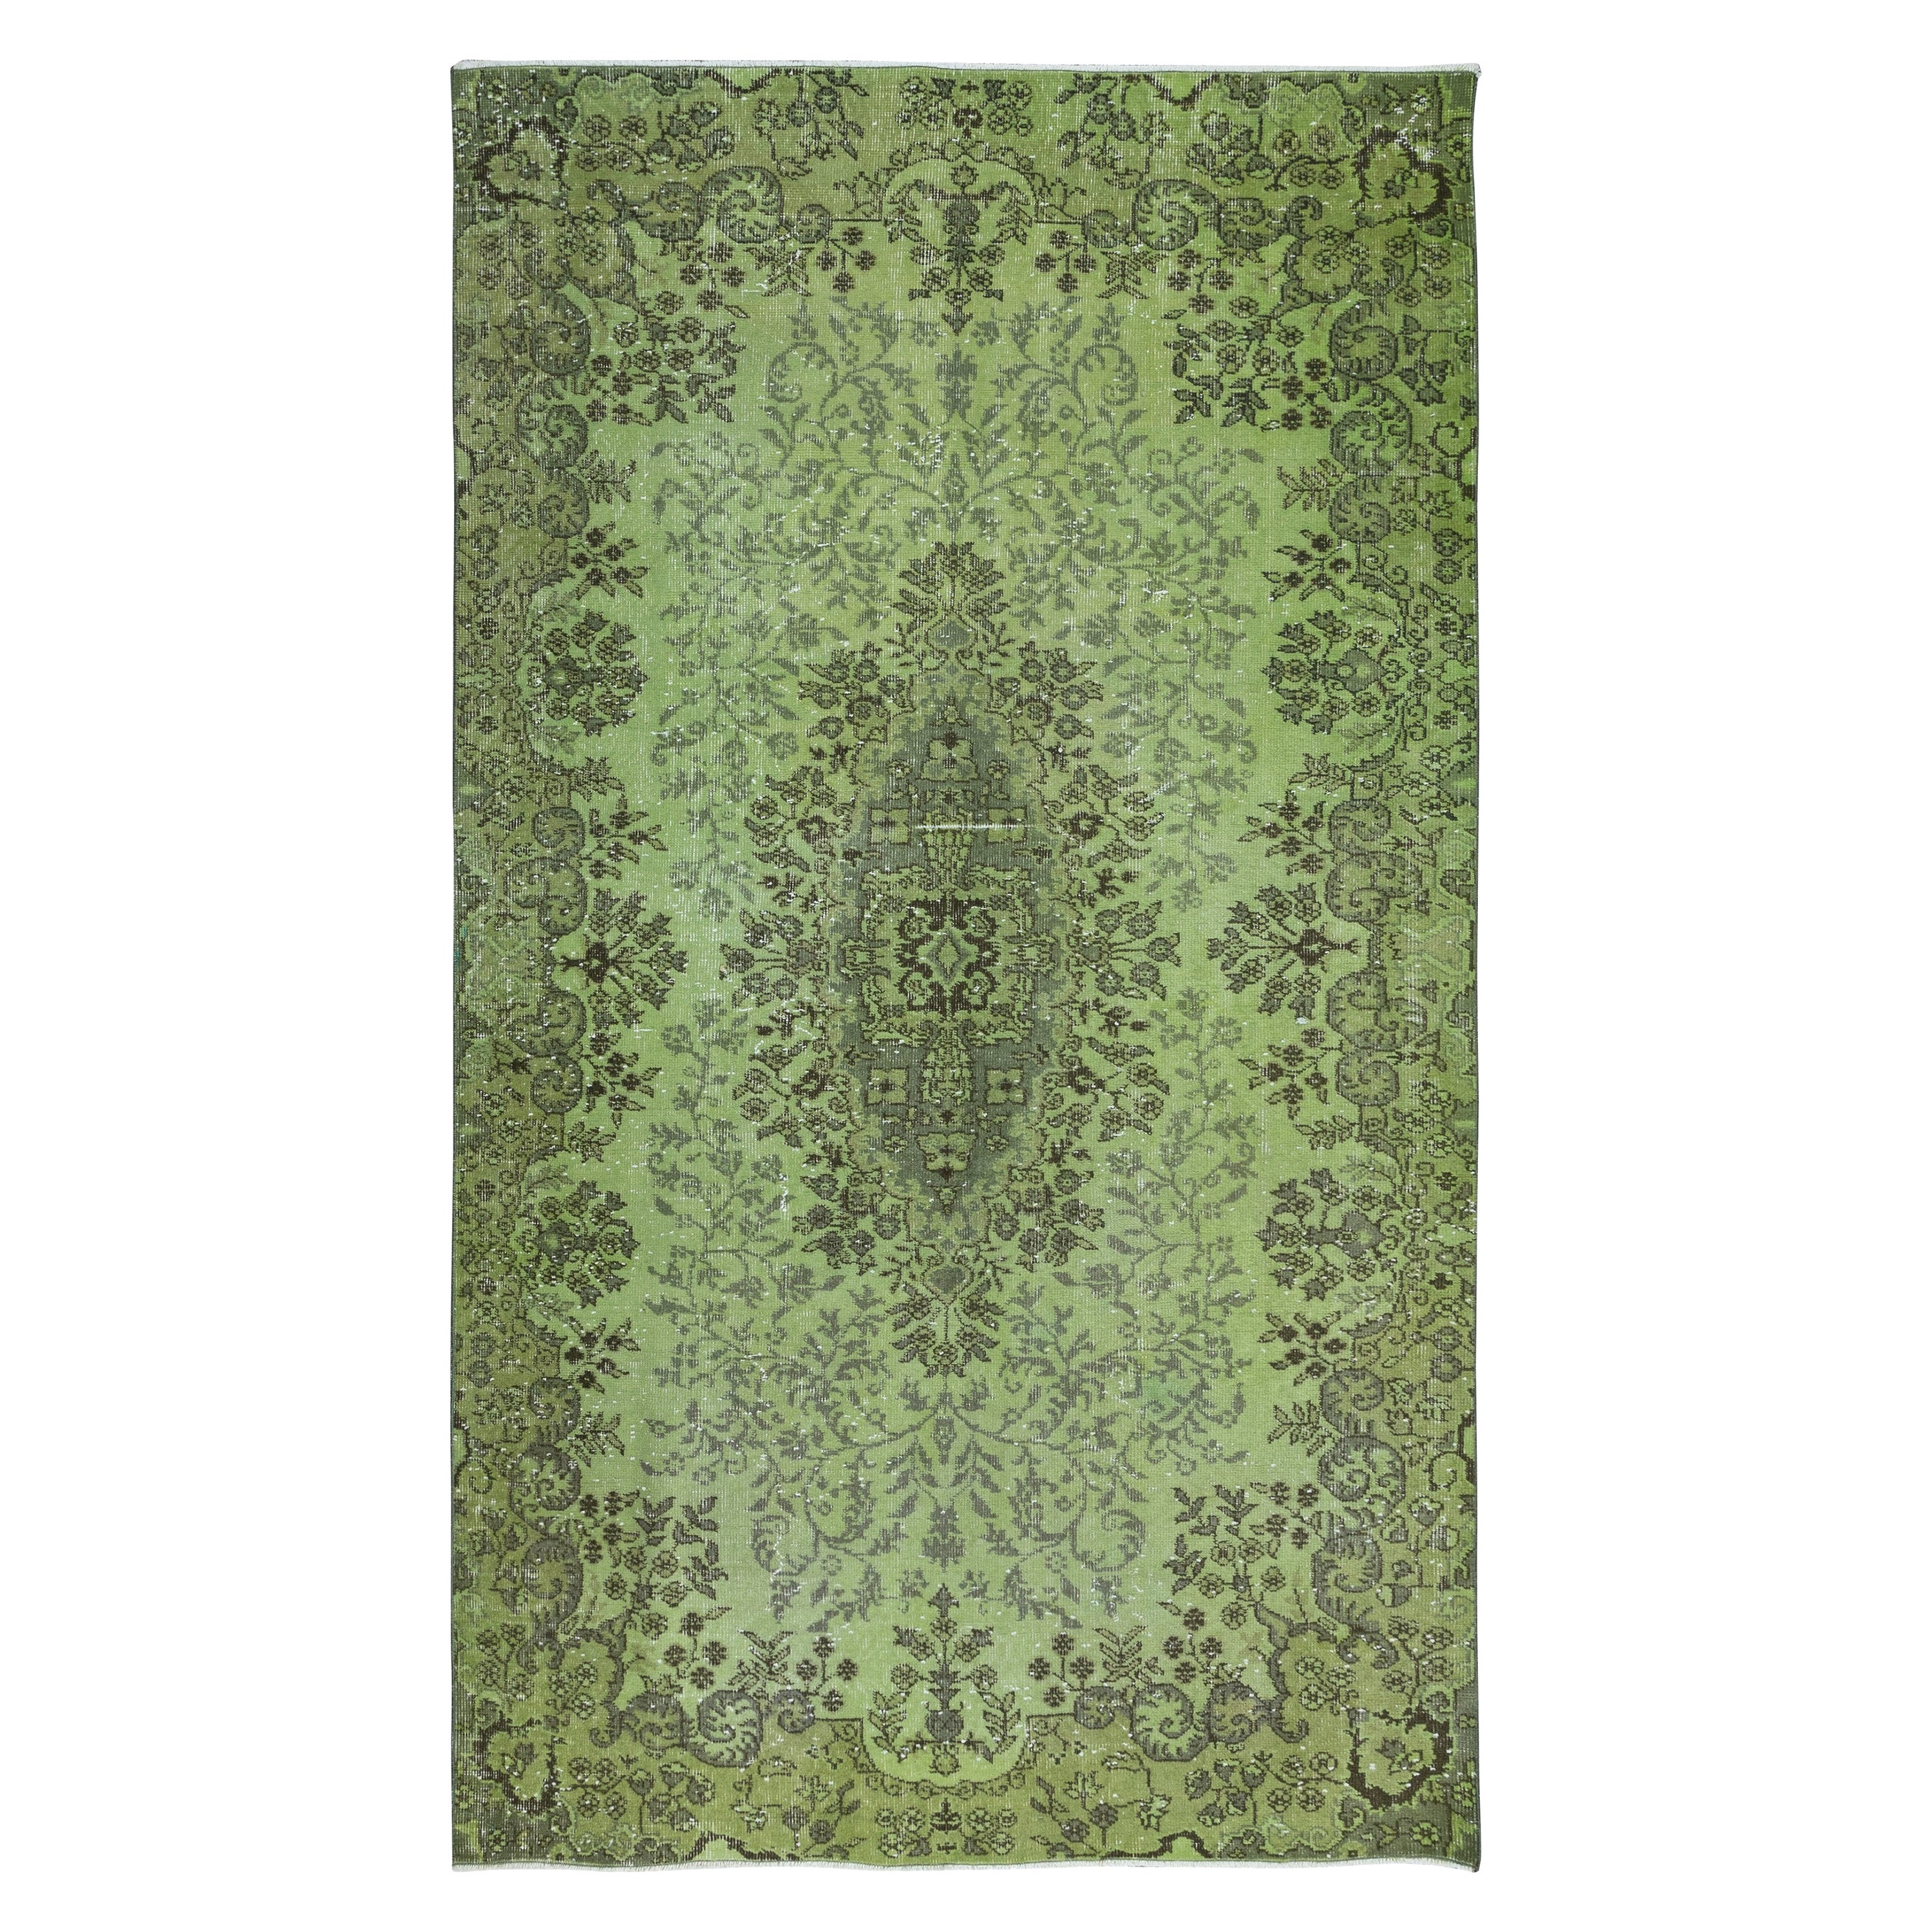 5.3x9 Ft Hand-Made Turkish Area Rug in Light Green, Contemporary Upcycled Carpet